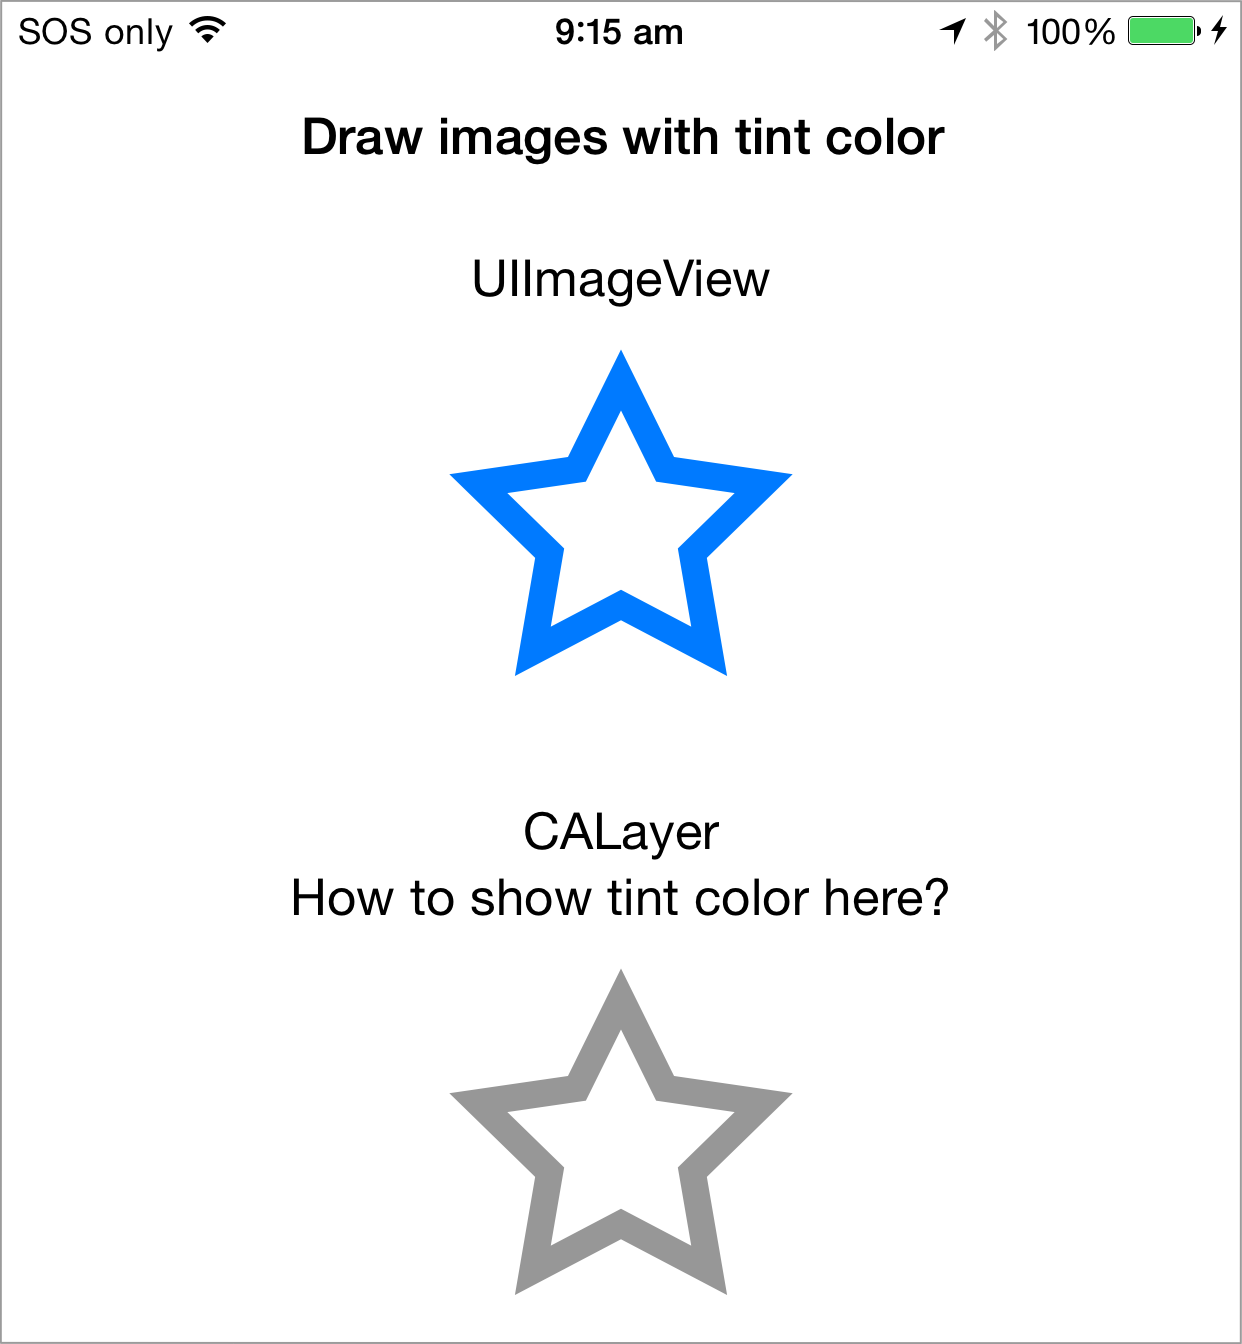 Show image with tint color on iOS